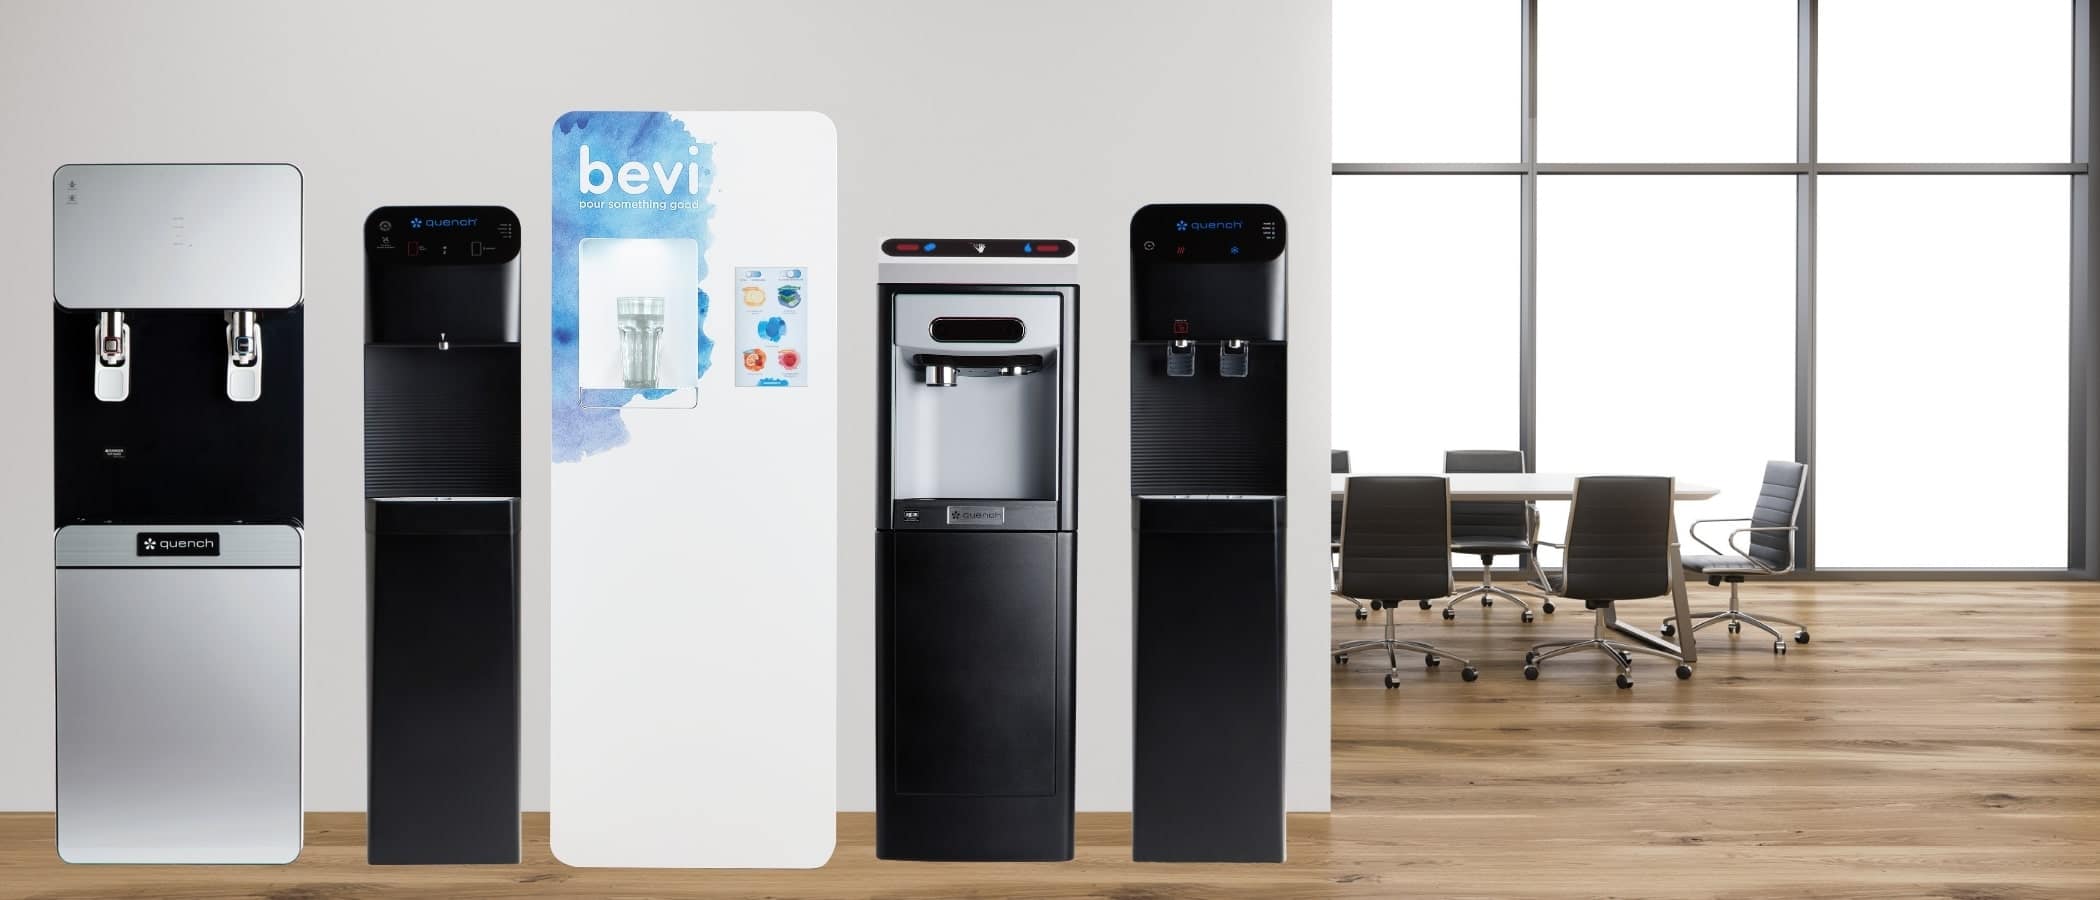 Quench touchless water coolers lined up in a modern workplace